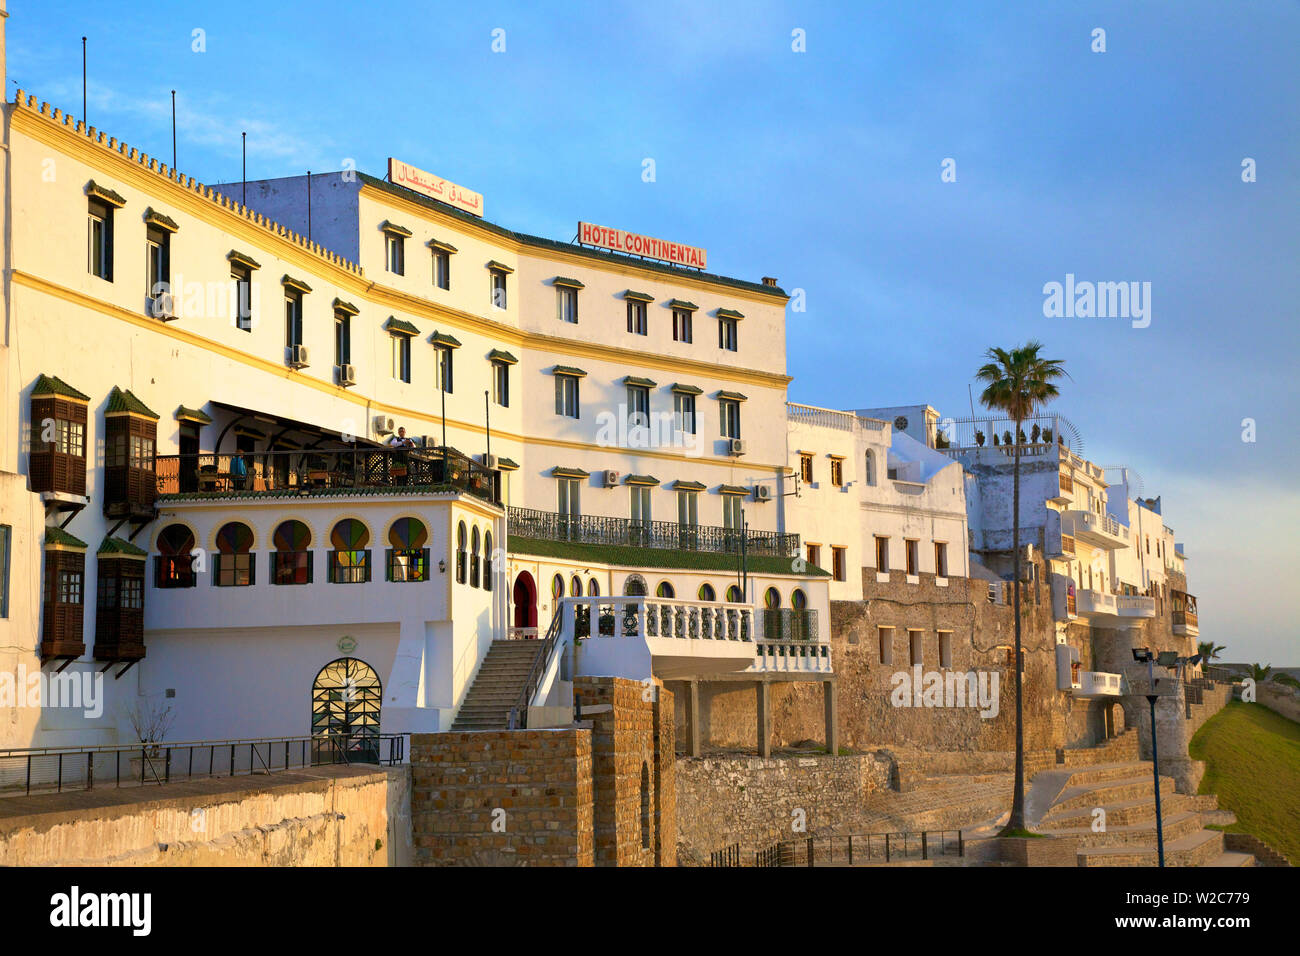 Exterior of Hotel Continental, Tangier, Morocco, North Africa Stock Photo